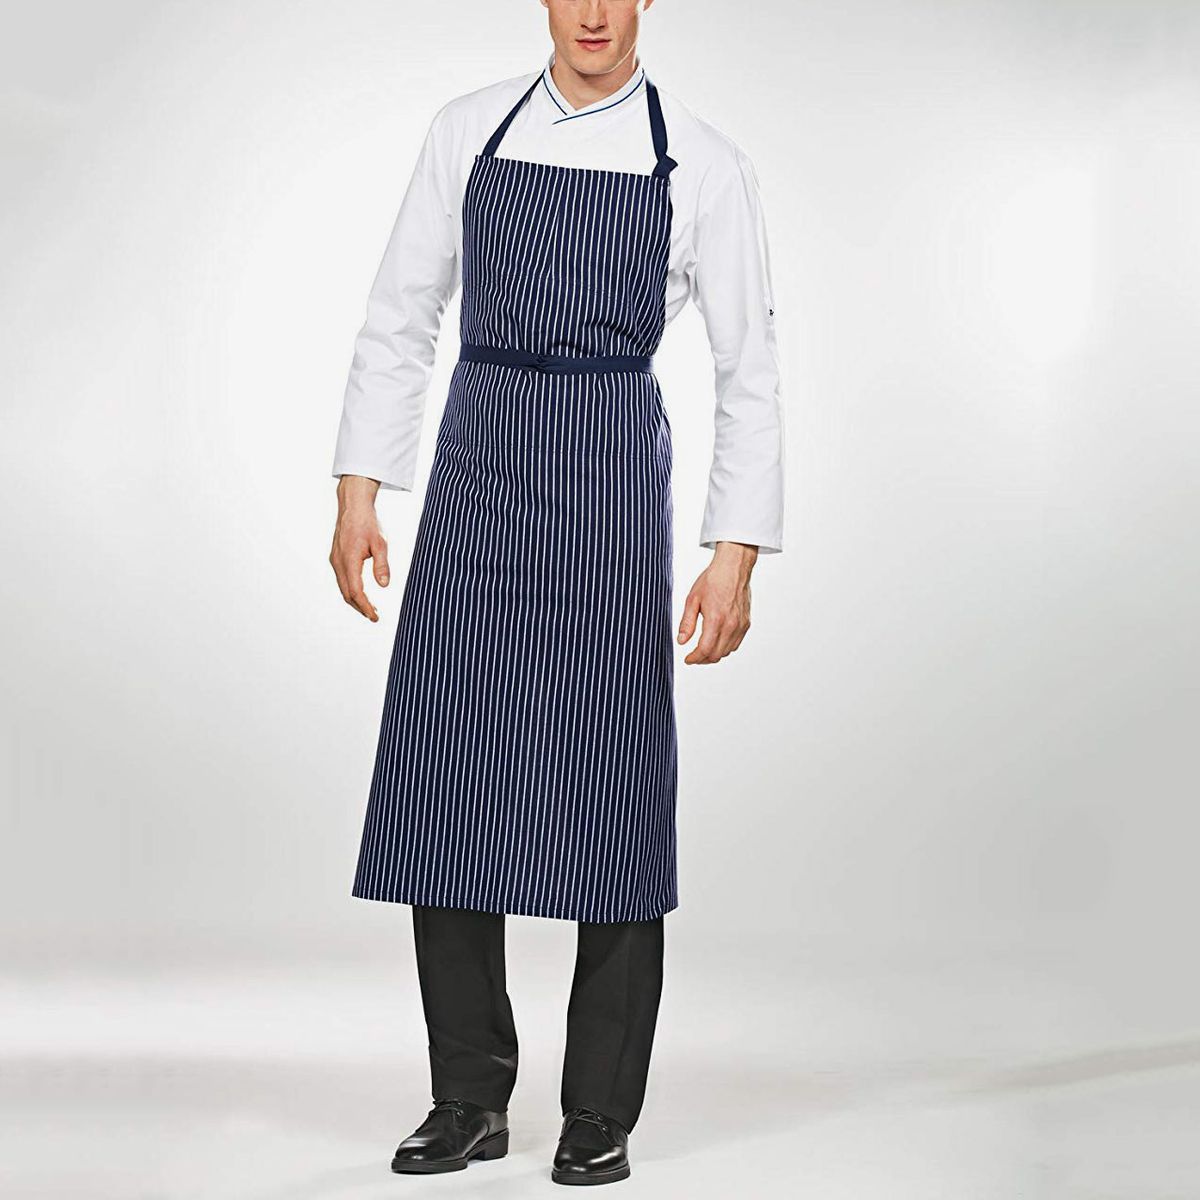 Dyckhoff Cooking Apron Chef Professional Kitchen Apron Bib Apron Cooking Apron Apron 